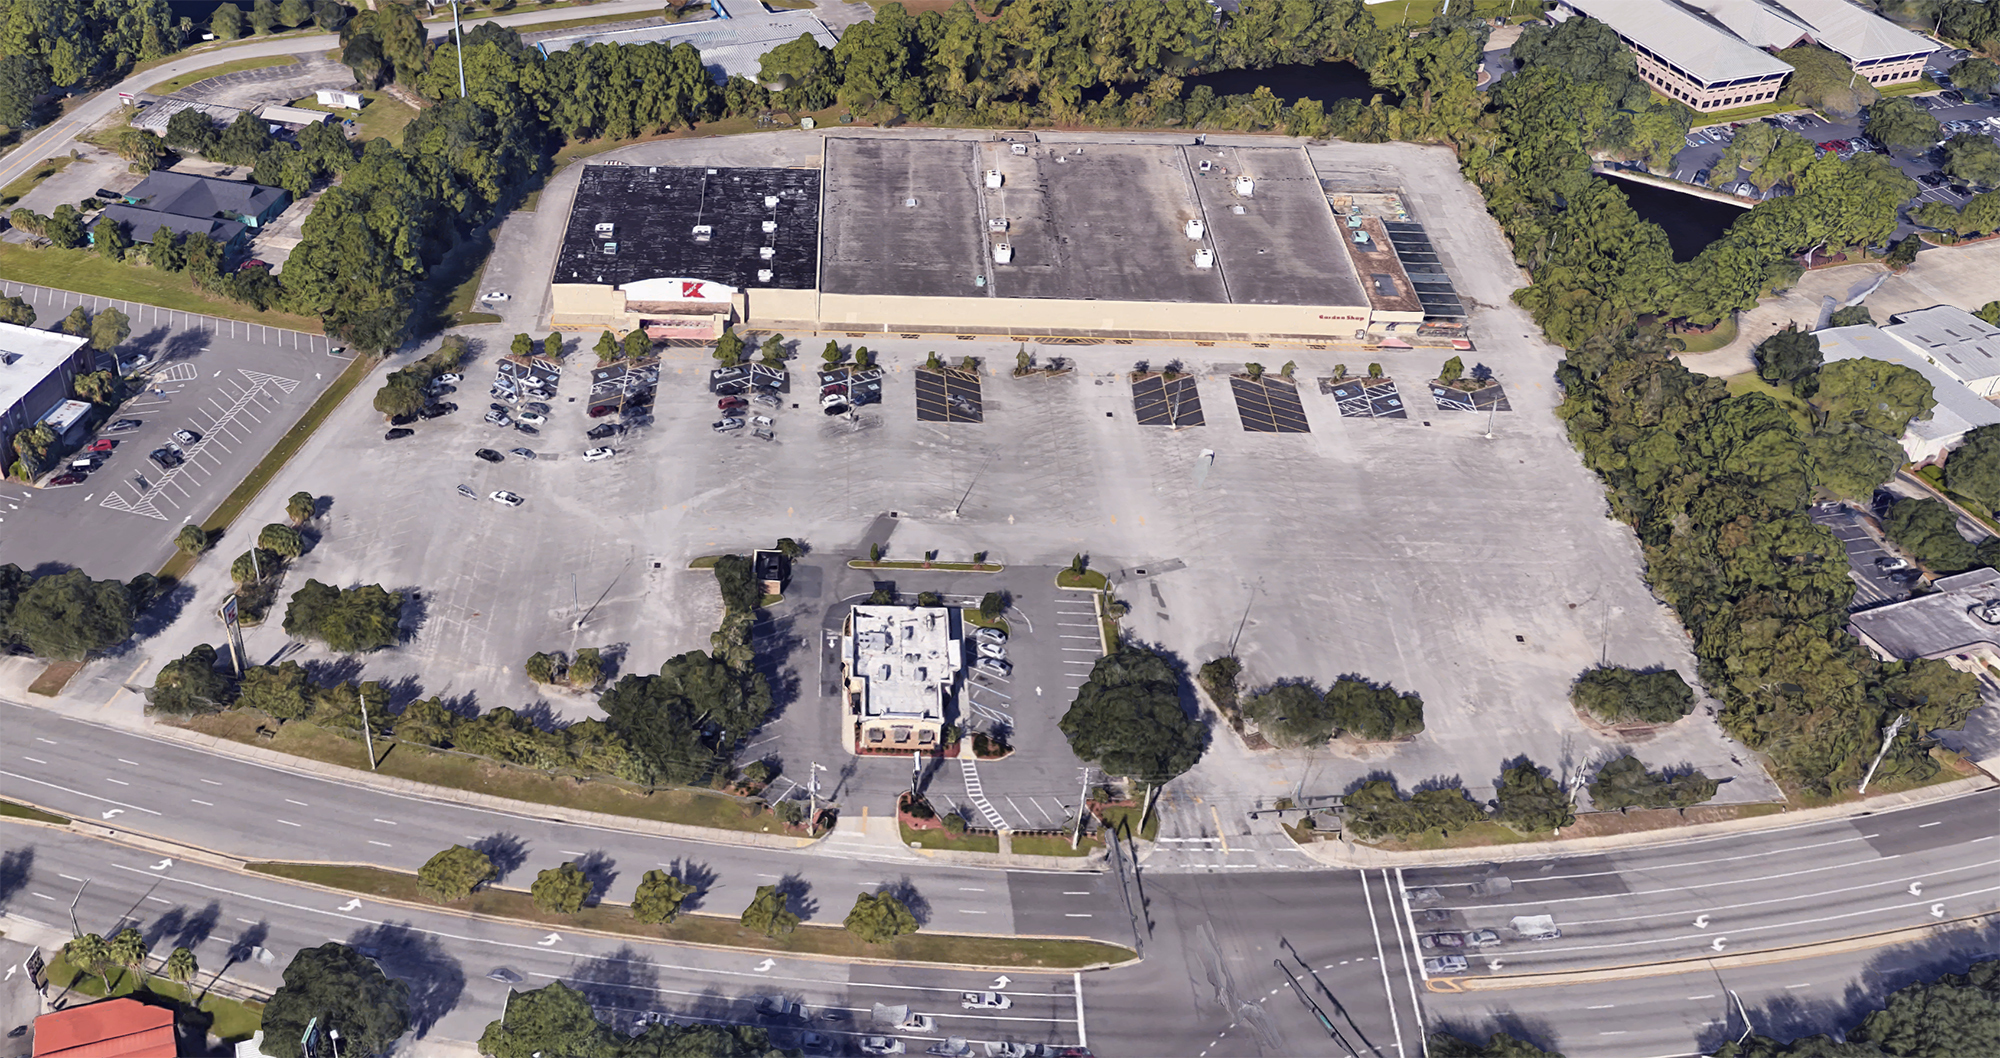 Plans for the renovated former Kmart don't include the Zaxby's restaurant in the parking lot. (Google)